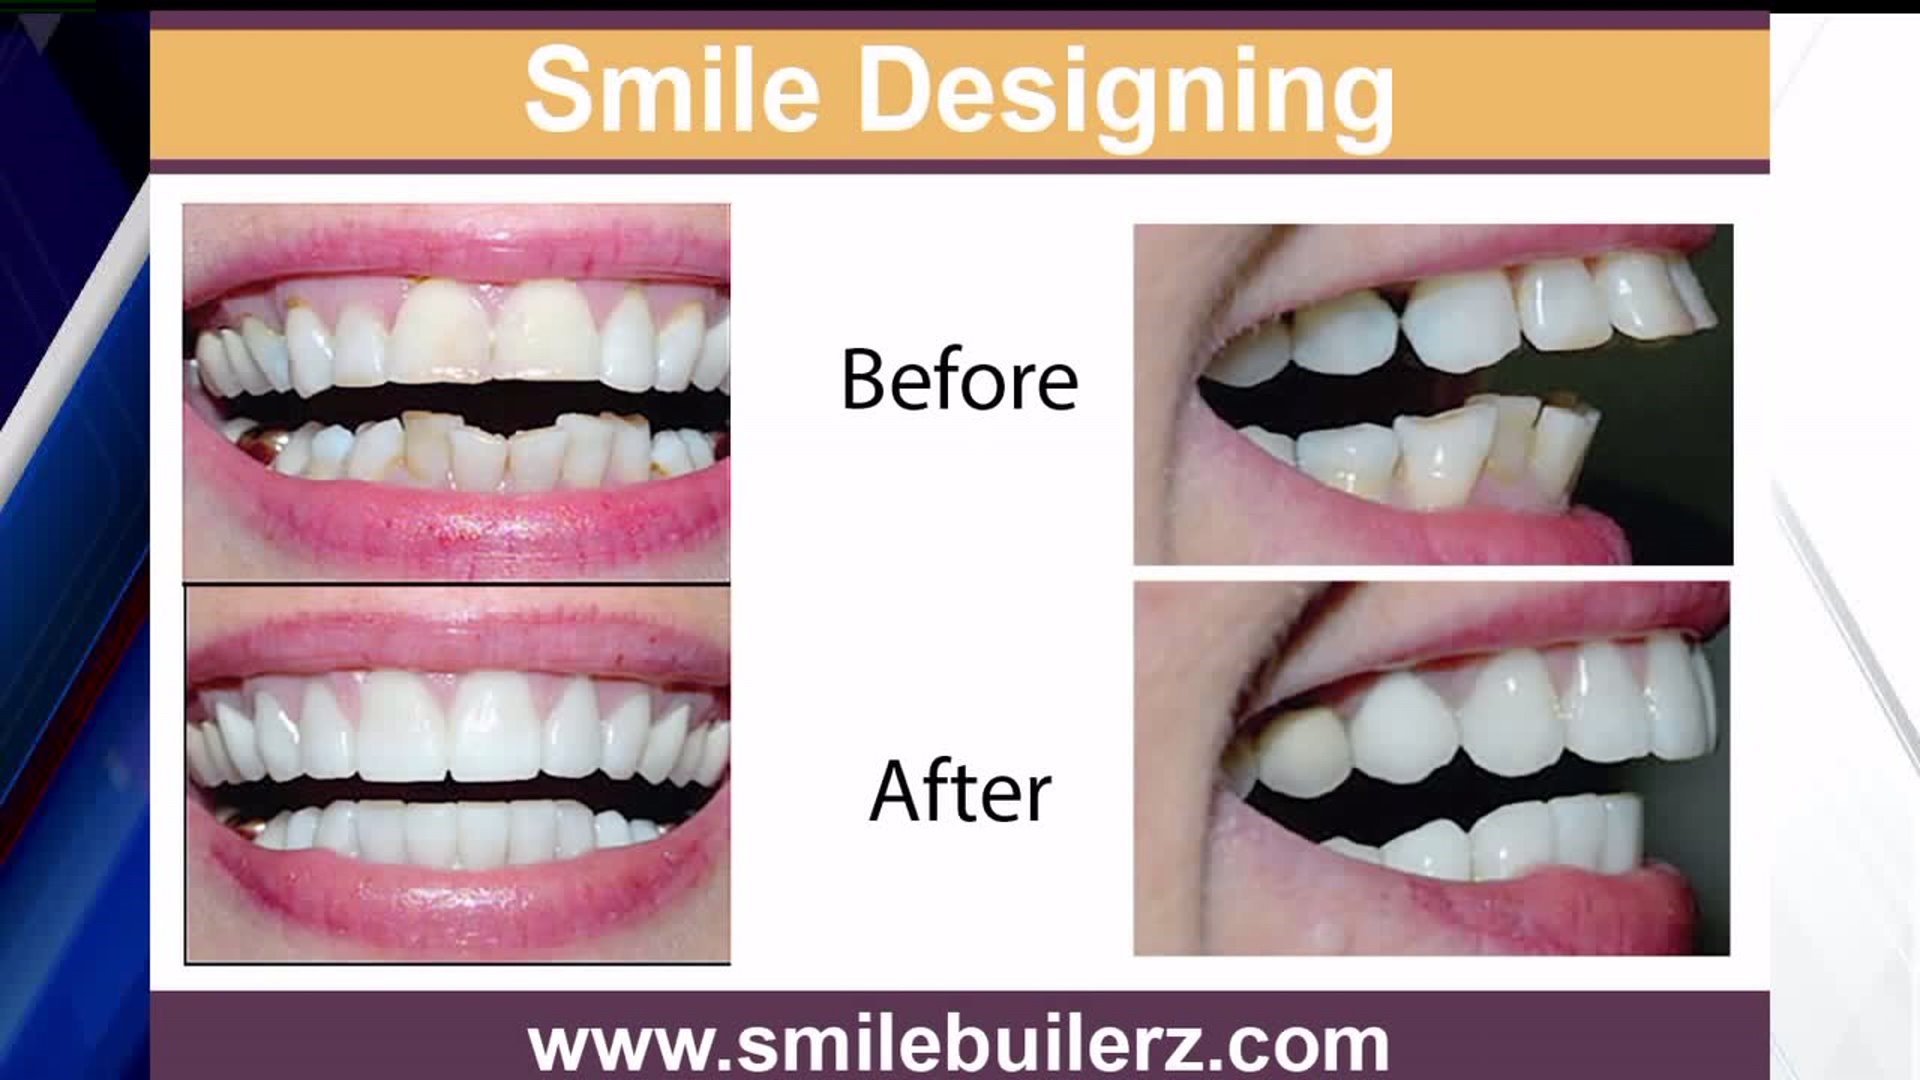 Cosmetic dentistry can keep your smile looking bright